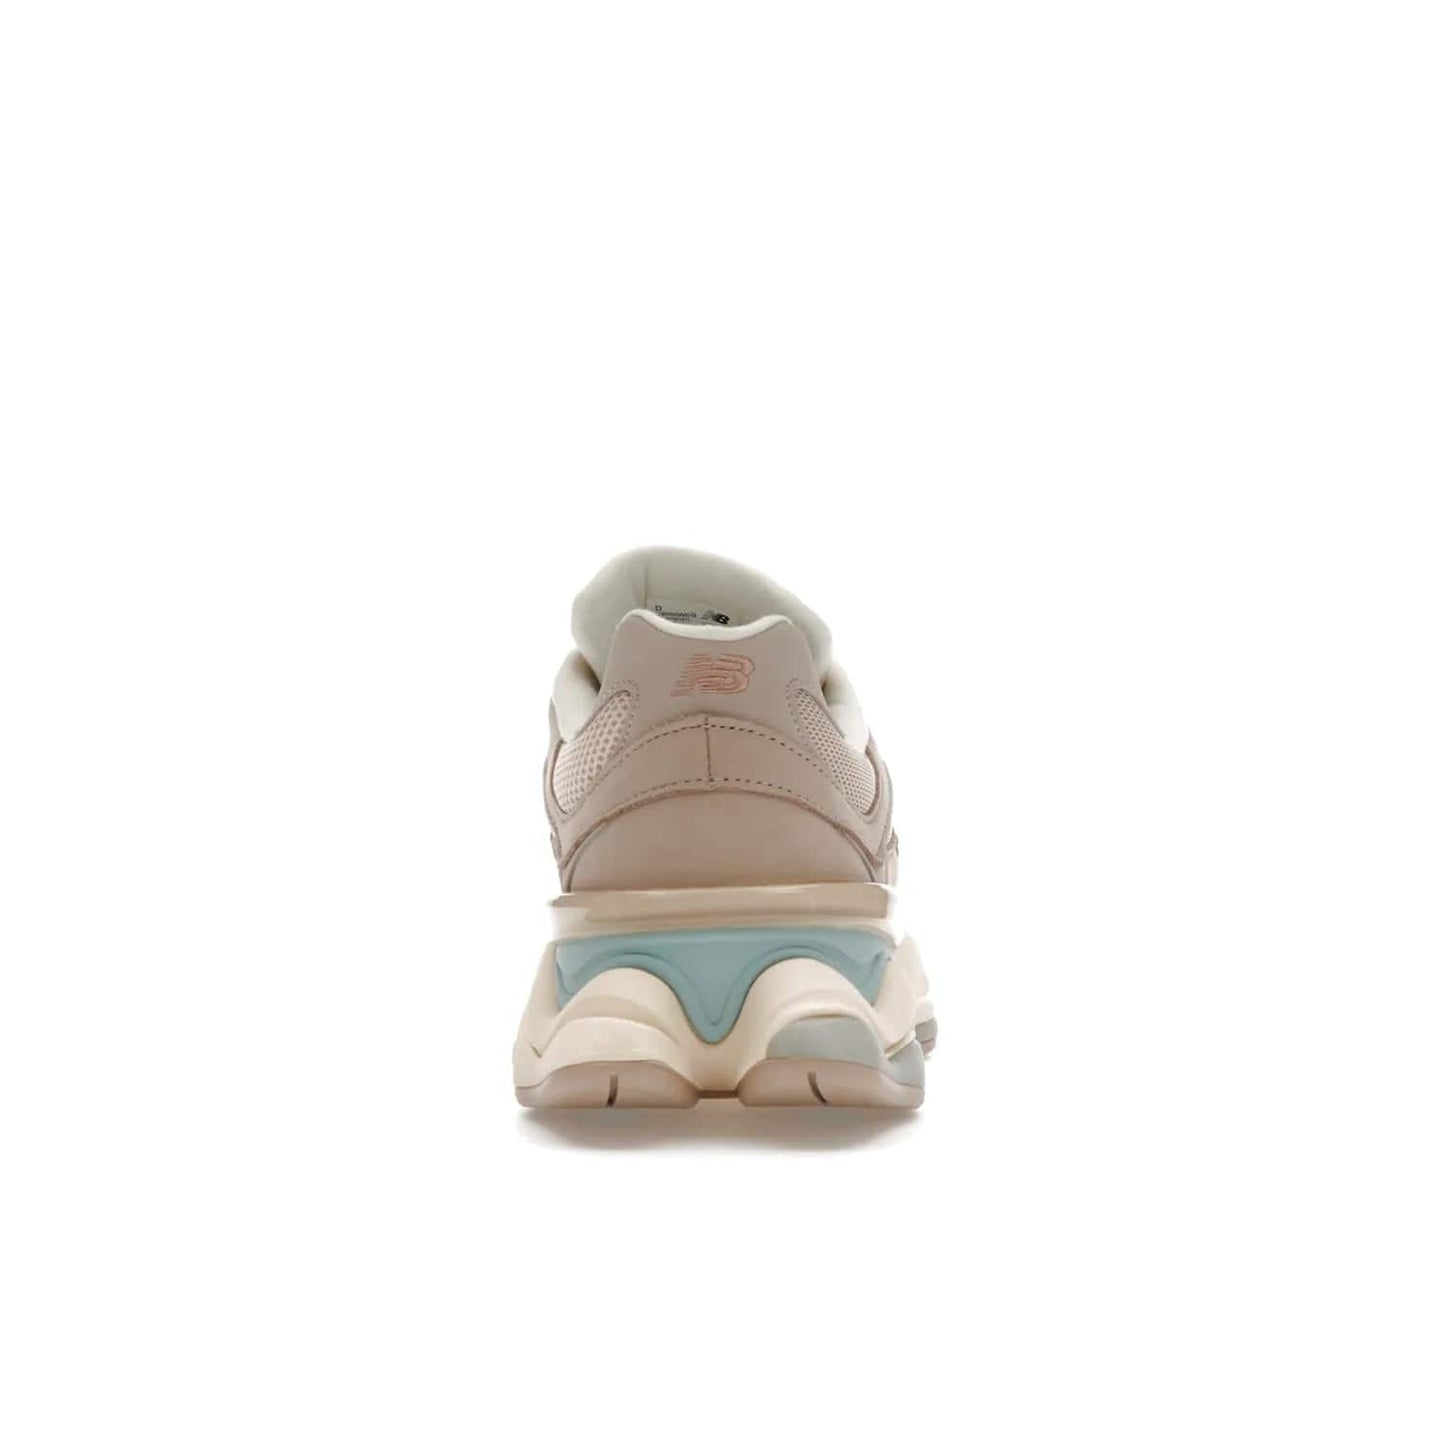 New Balance 9060 Ivory Cream Pink Sand - Image 28 - Only at www.BallersClubKickz.com - New Balance 9060 Ivory Cream Pink Sand - Sleek meshed upper, premium suede overlays, ABZORB cushioning. Get this unique sneaker ahead of the trend, launching December 6th, 2022!